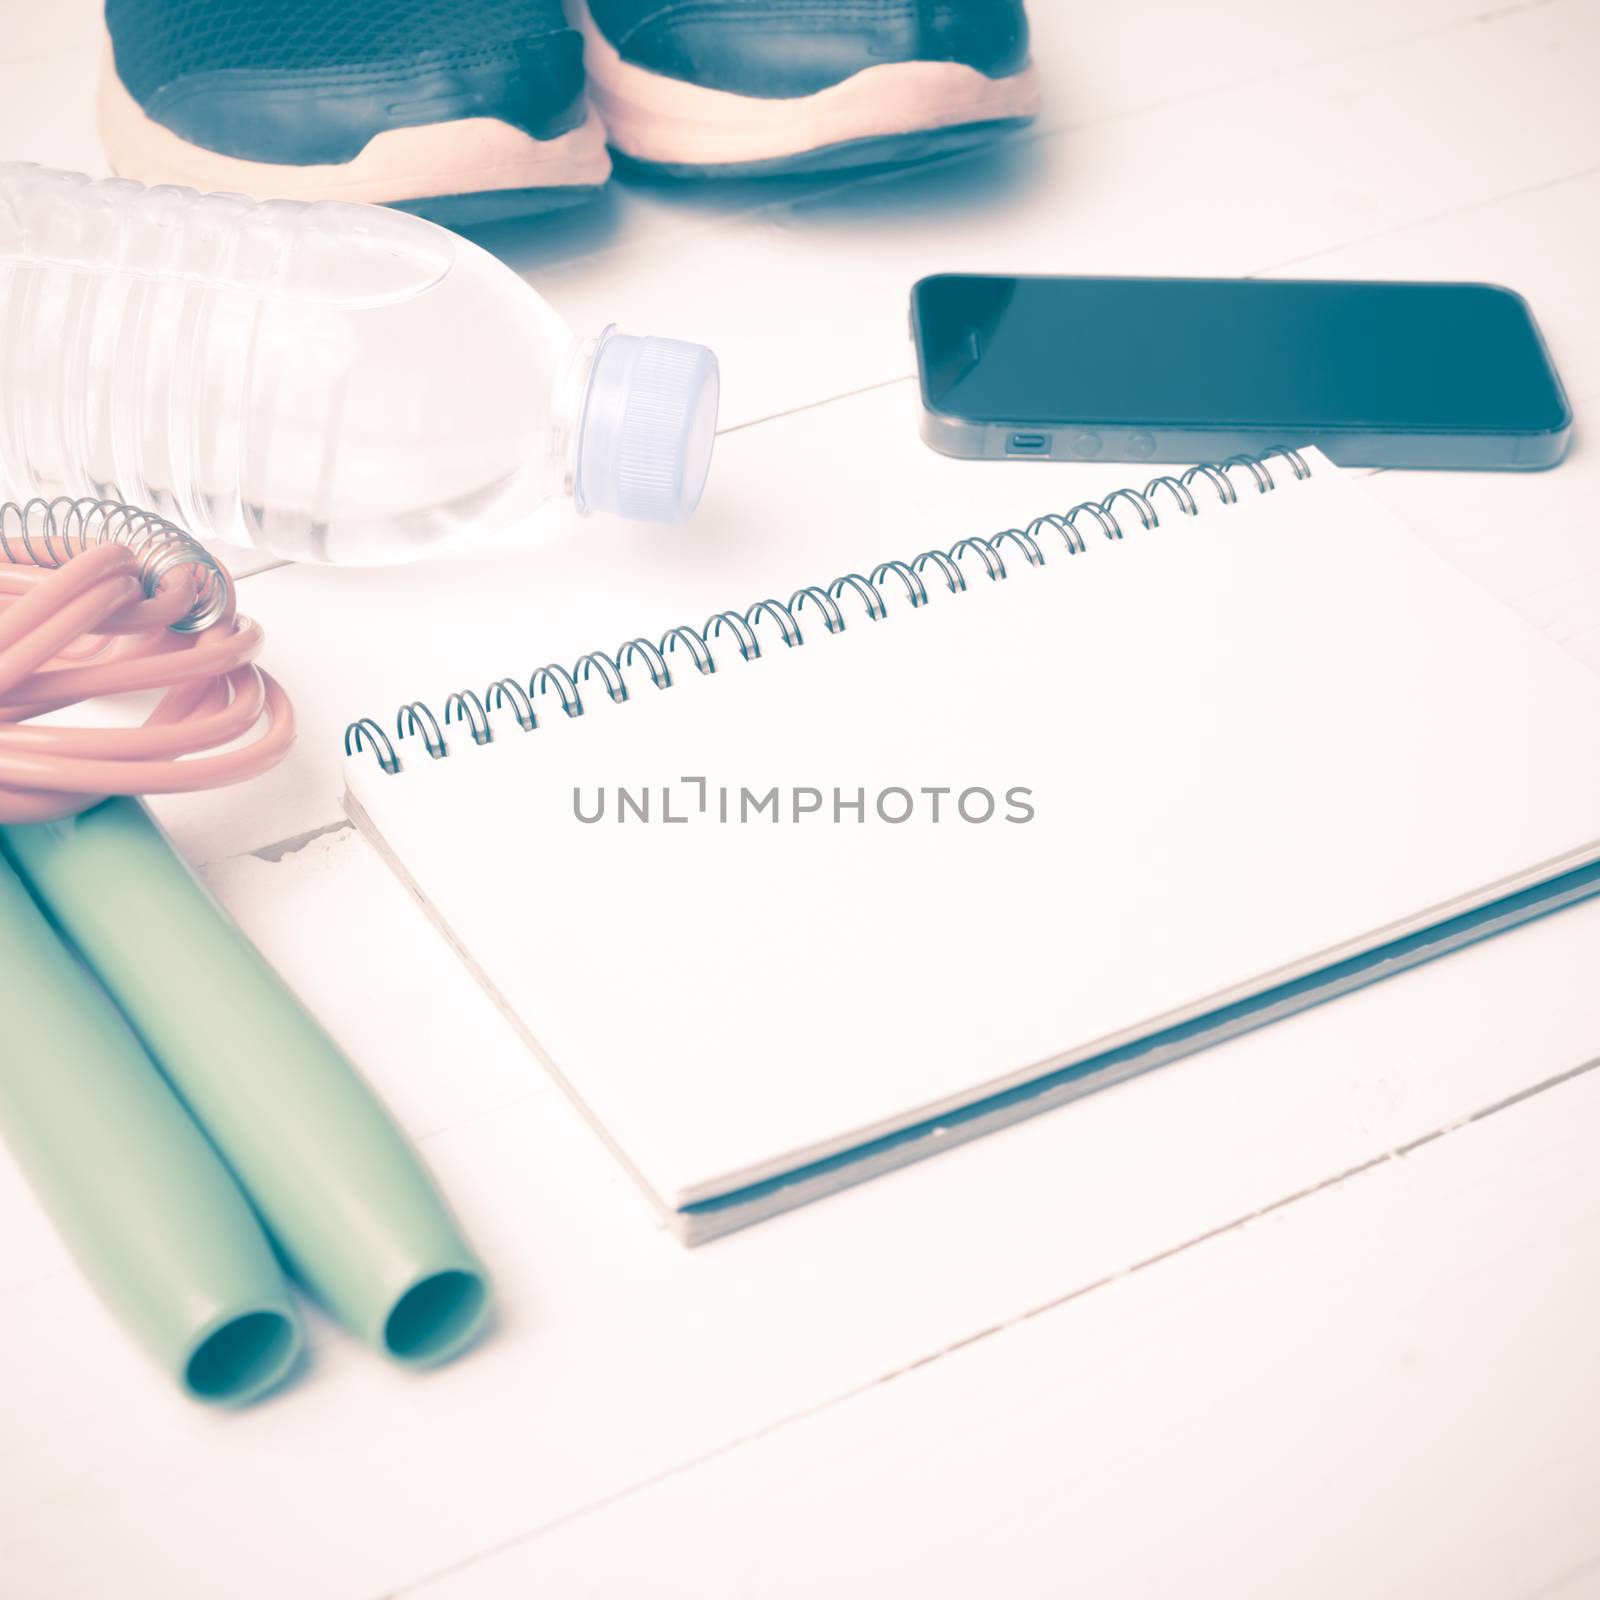 fitness equipment : running shoes,jumping rope,drinking water,notebook and phone on white wood table vintage style